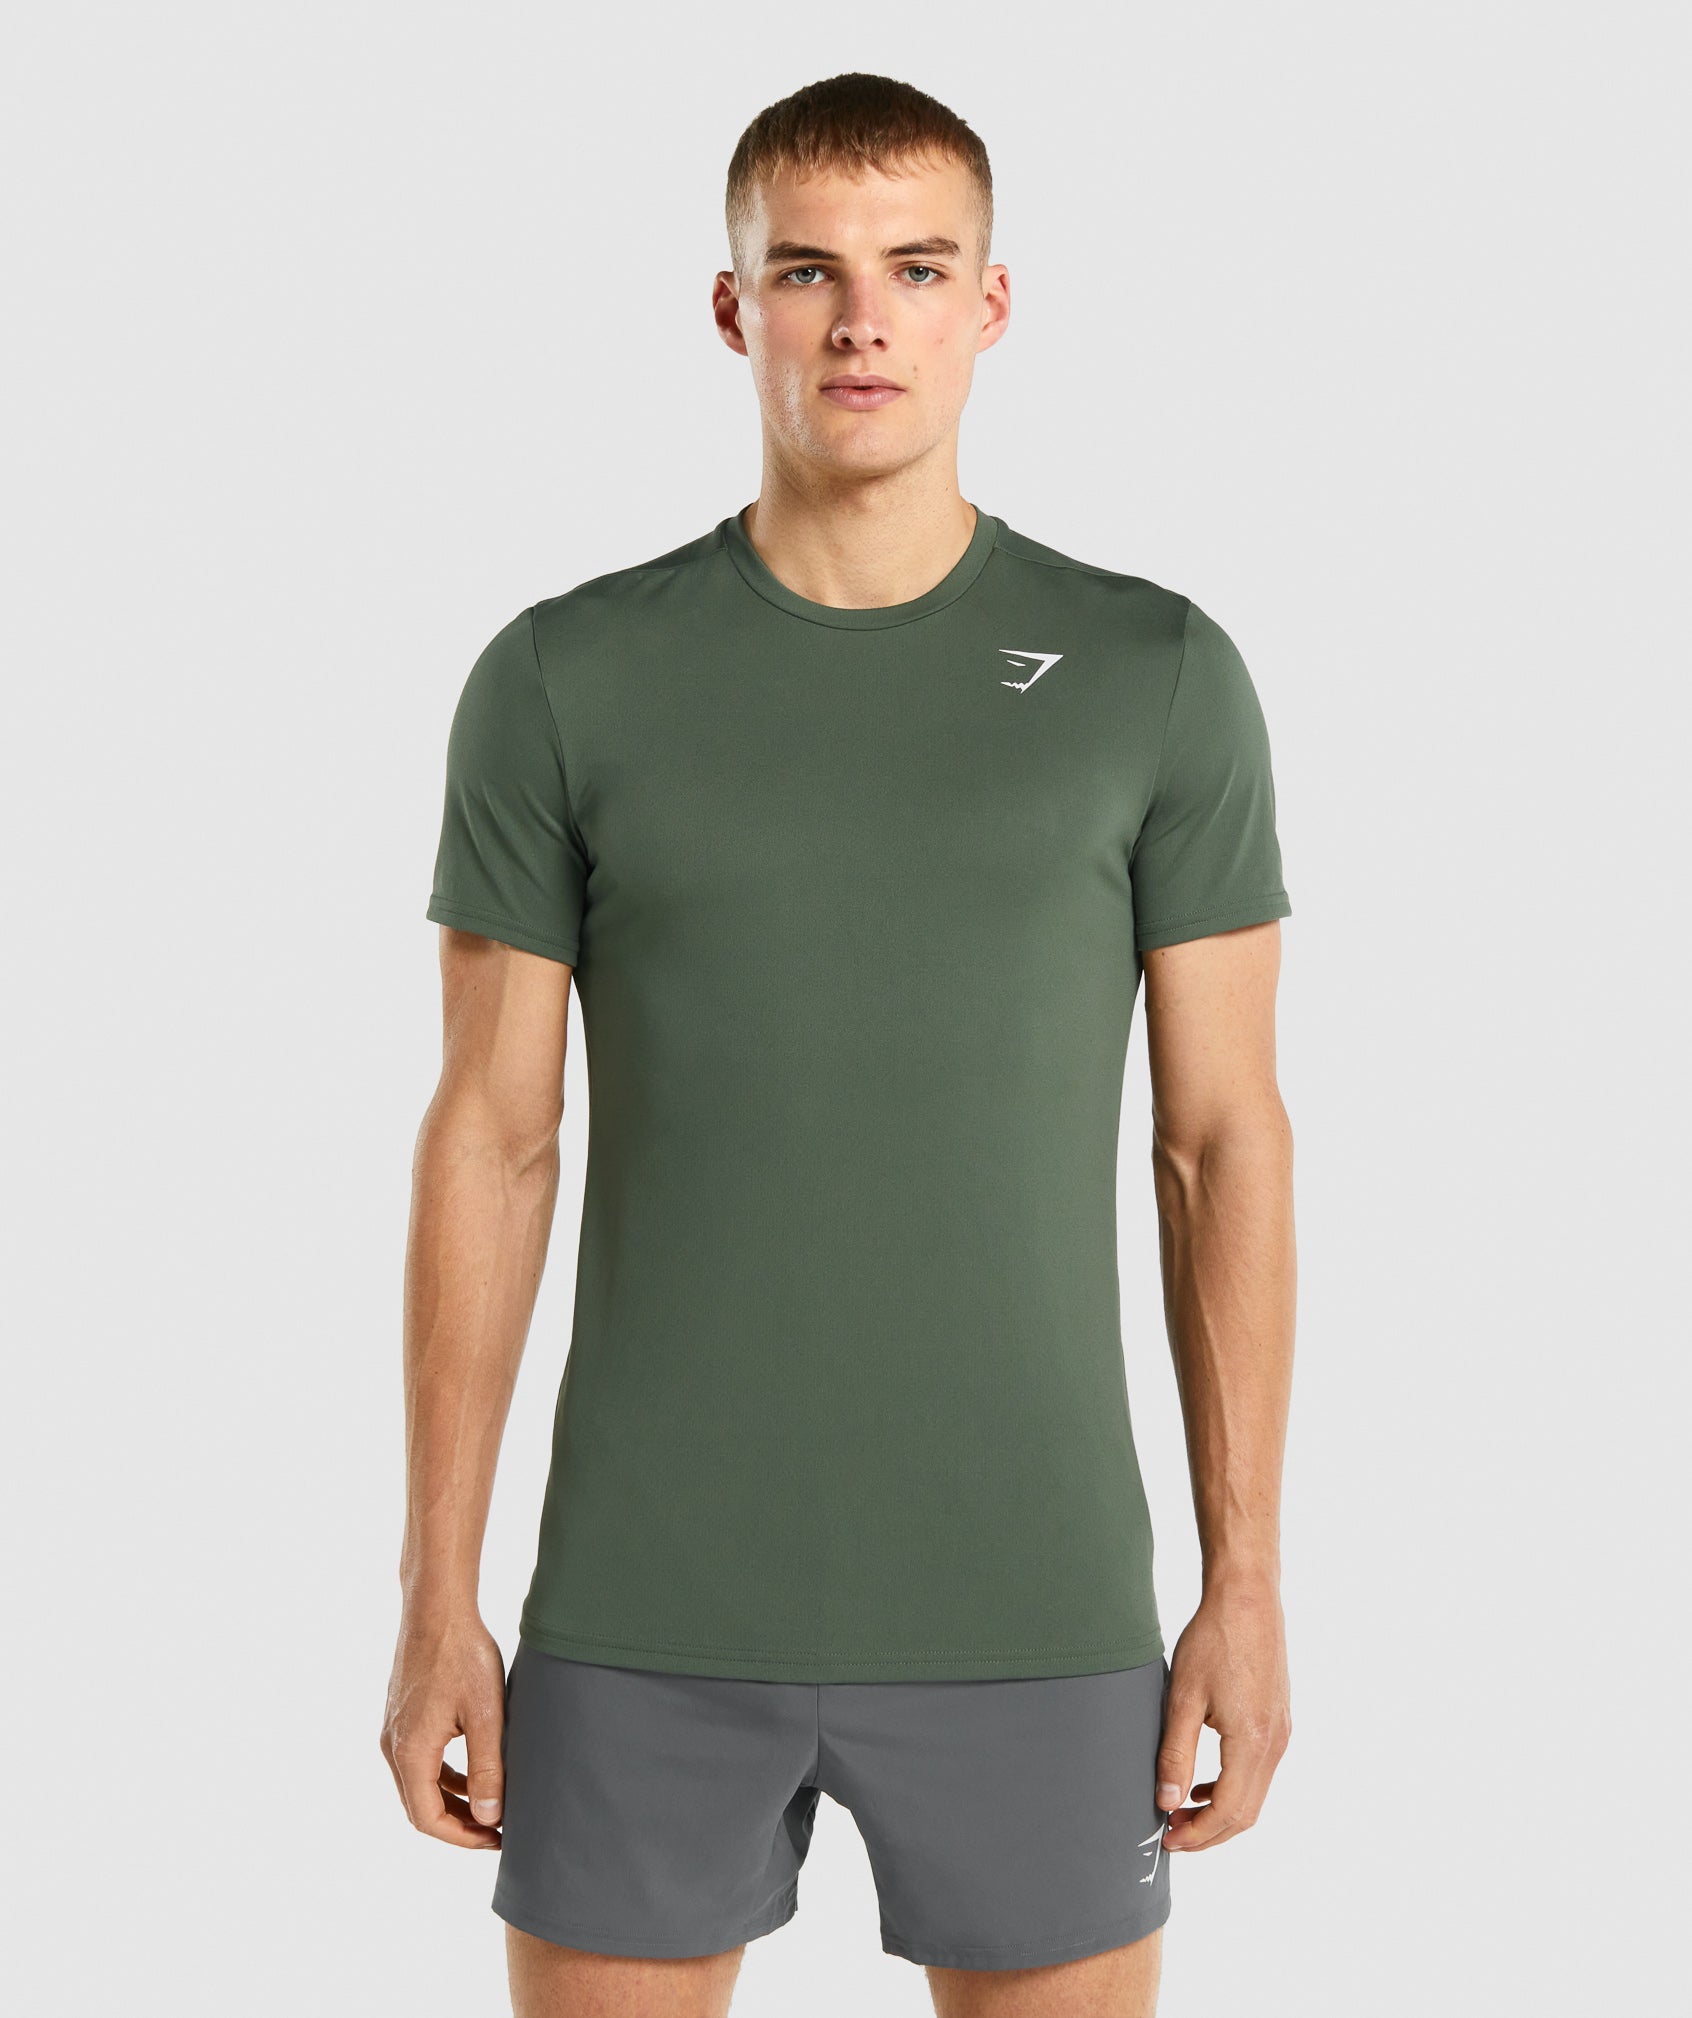 Arrival T-Shirt in Green - view 1